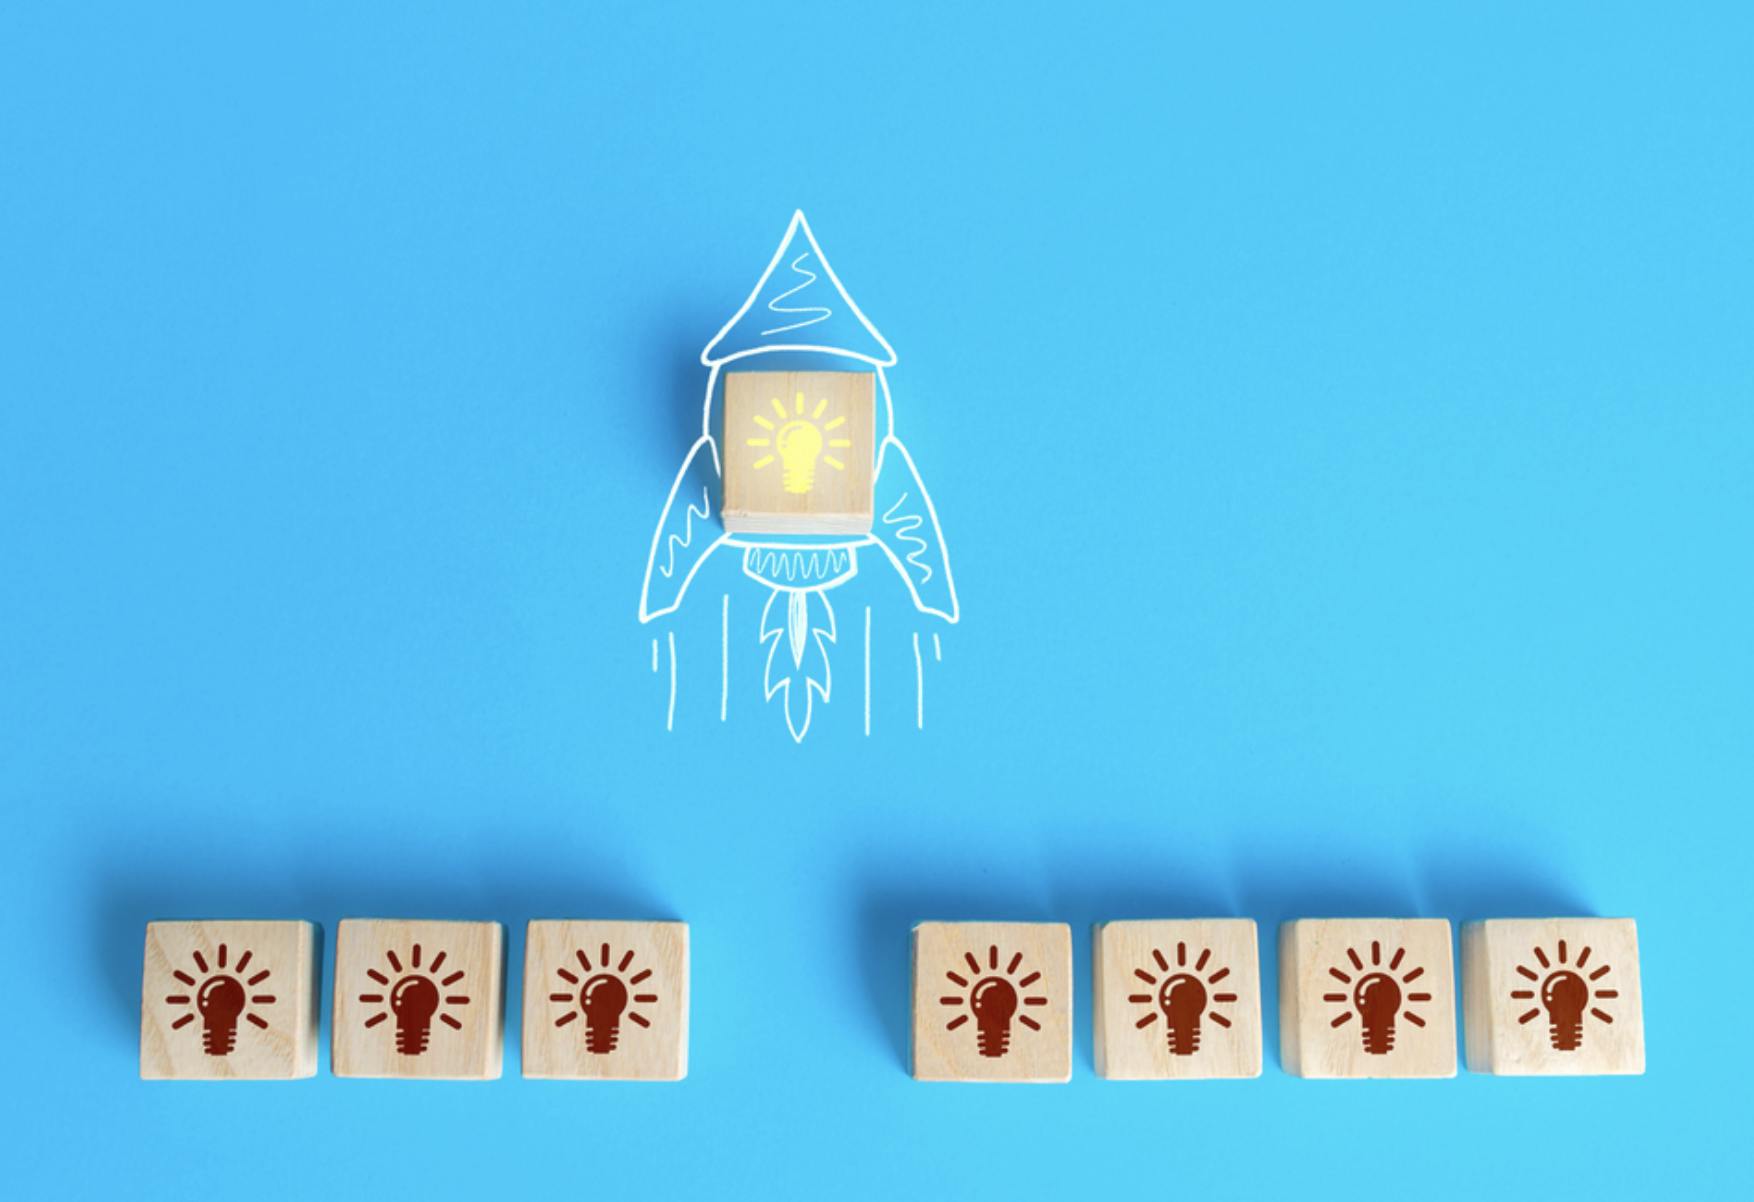 Stock Image showing a blue background with a rocket ship drawn in white. Seven wooden blocks all with a lit light bulb engraved in them in brown are lined up below the rocket ship with one block and in the center of the rocket ship drawing and the light bulb is painted yellow. Related to Pilot IRS project.